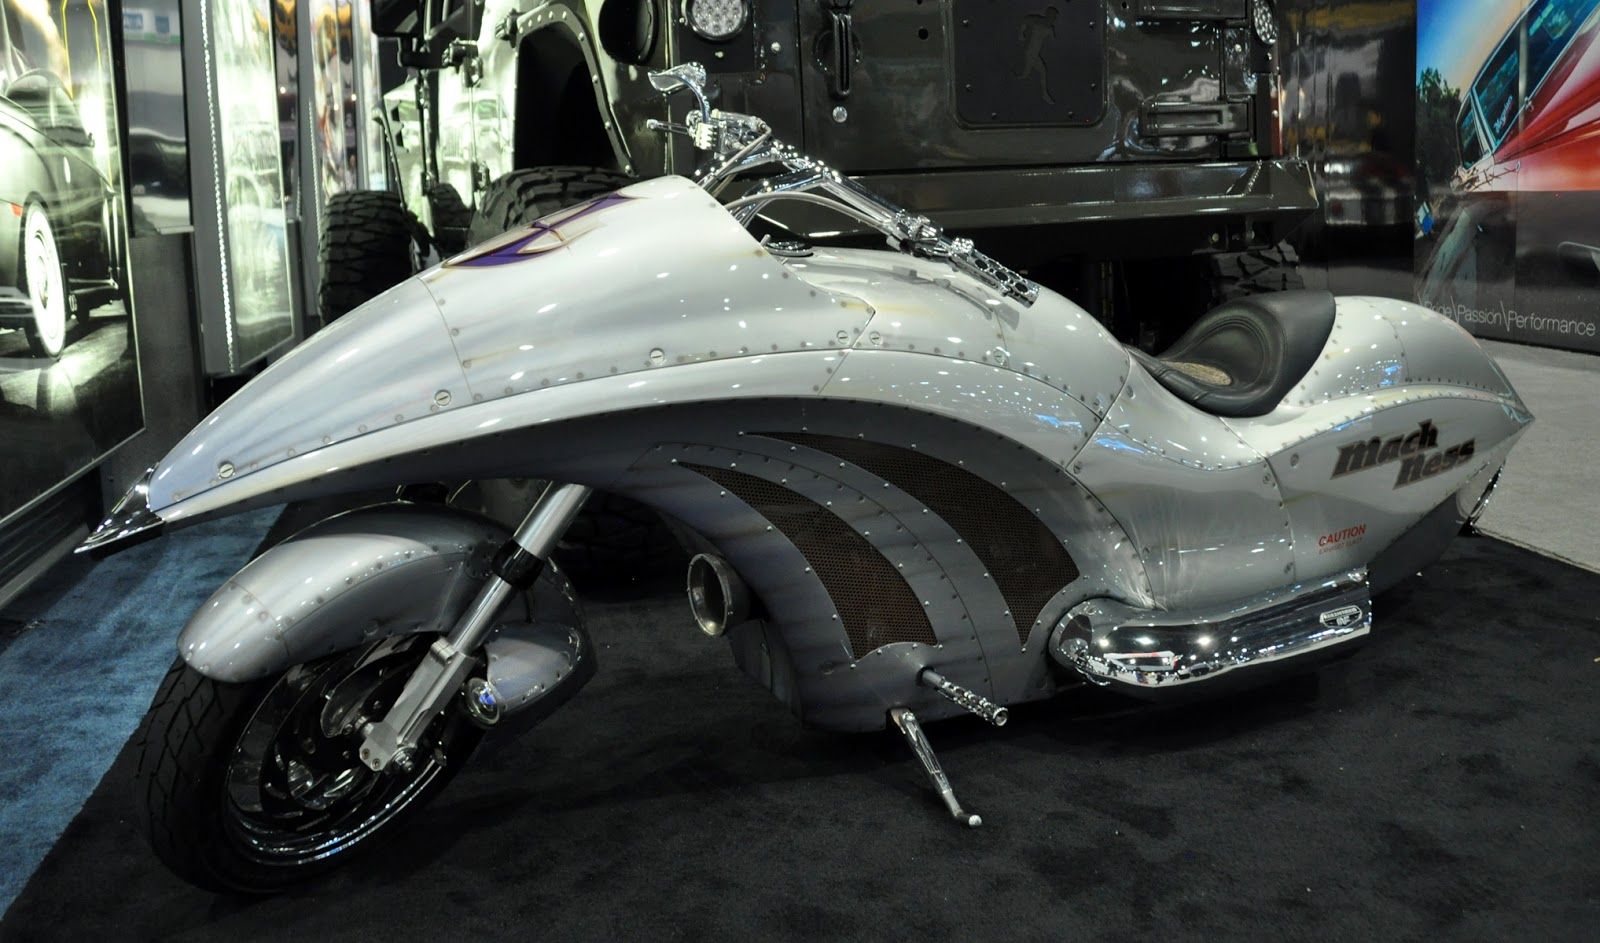 Mach Ness concept motorcycle